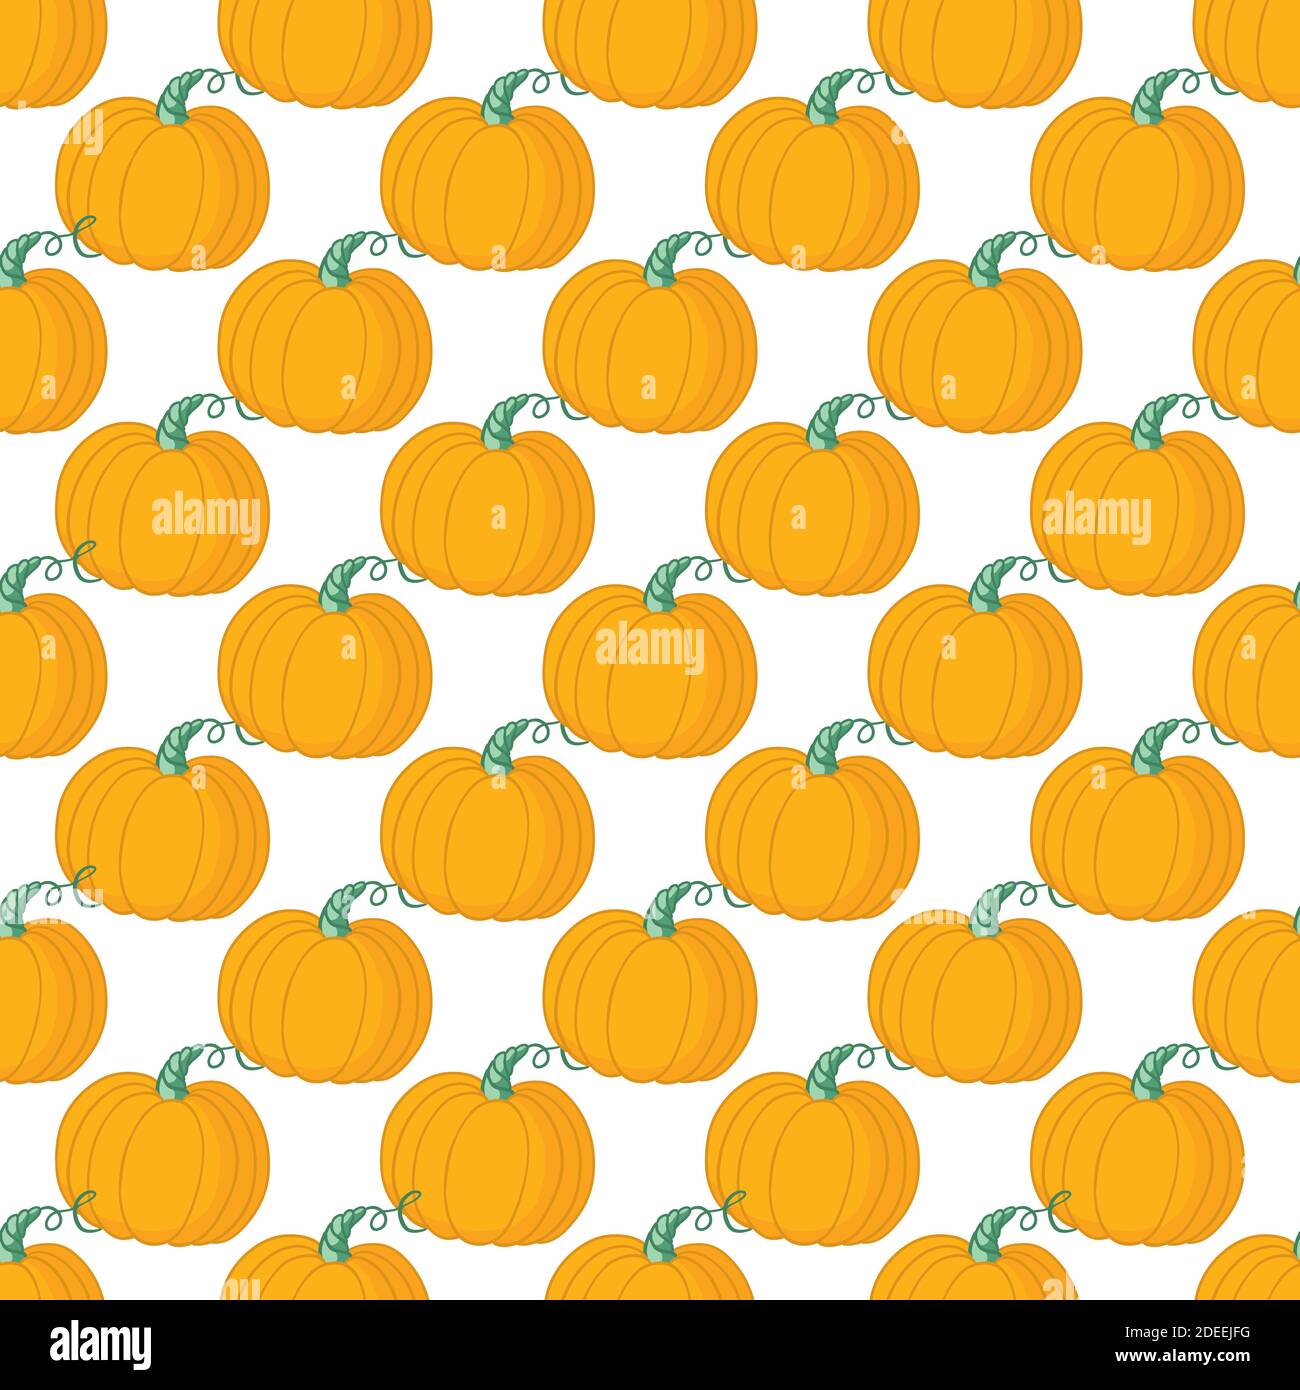 Seamless vector pattern, hand drawn floral background. Halloween collection. Stock Vector